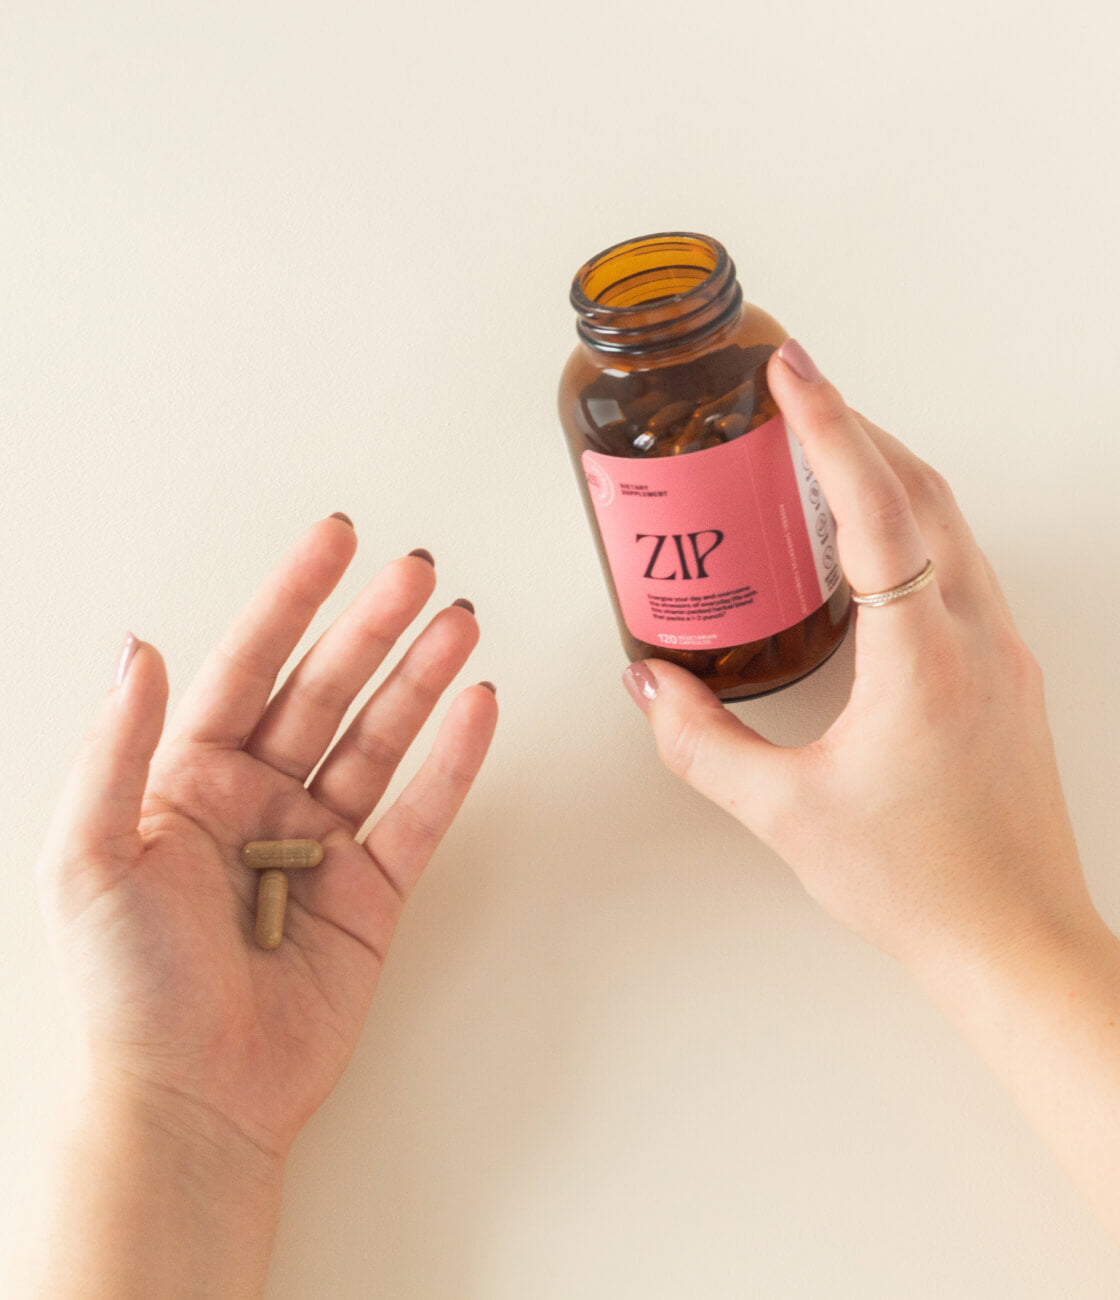 Our dietary supplement capsules are vegan, using hypromellose and RIce flour, making them gluten free and yeast free. The capsules are small enough to be comfortable to swallow. [AD: A feminine hand is holding 2 capsules, small enough to be nestled in the center of the palm]